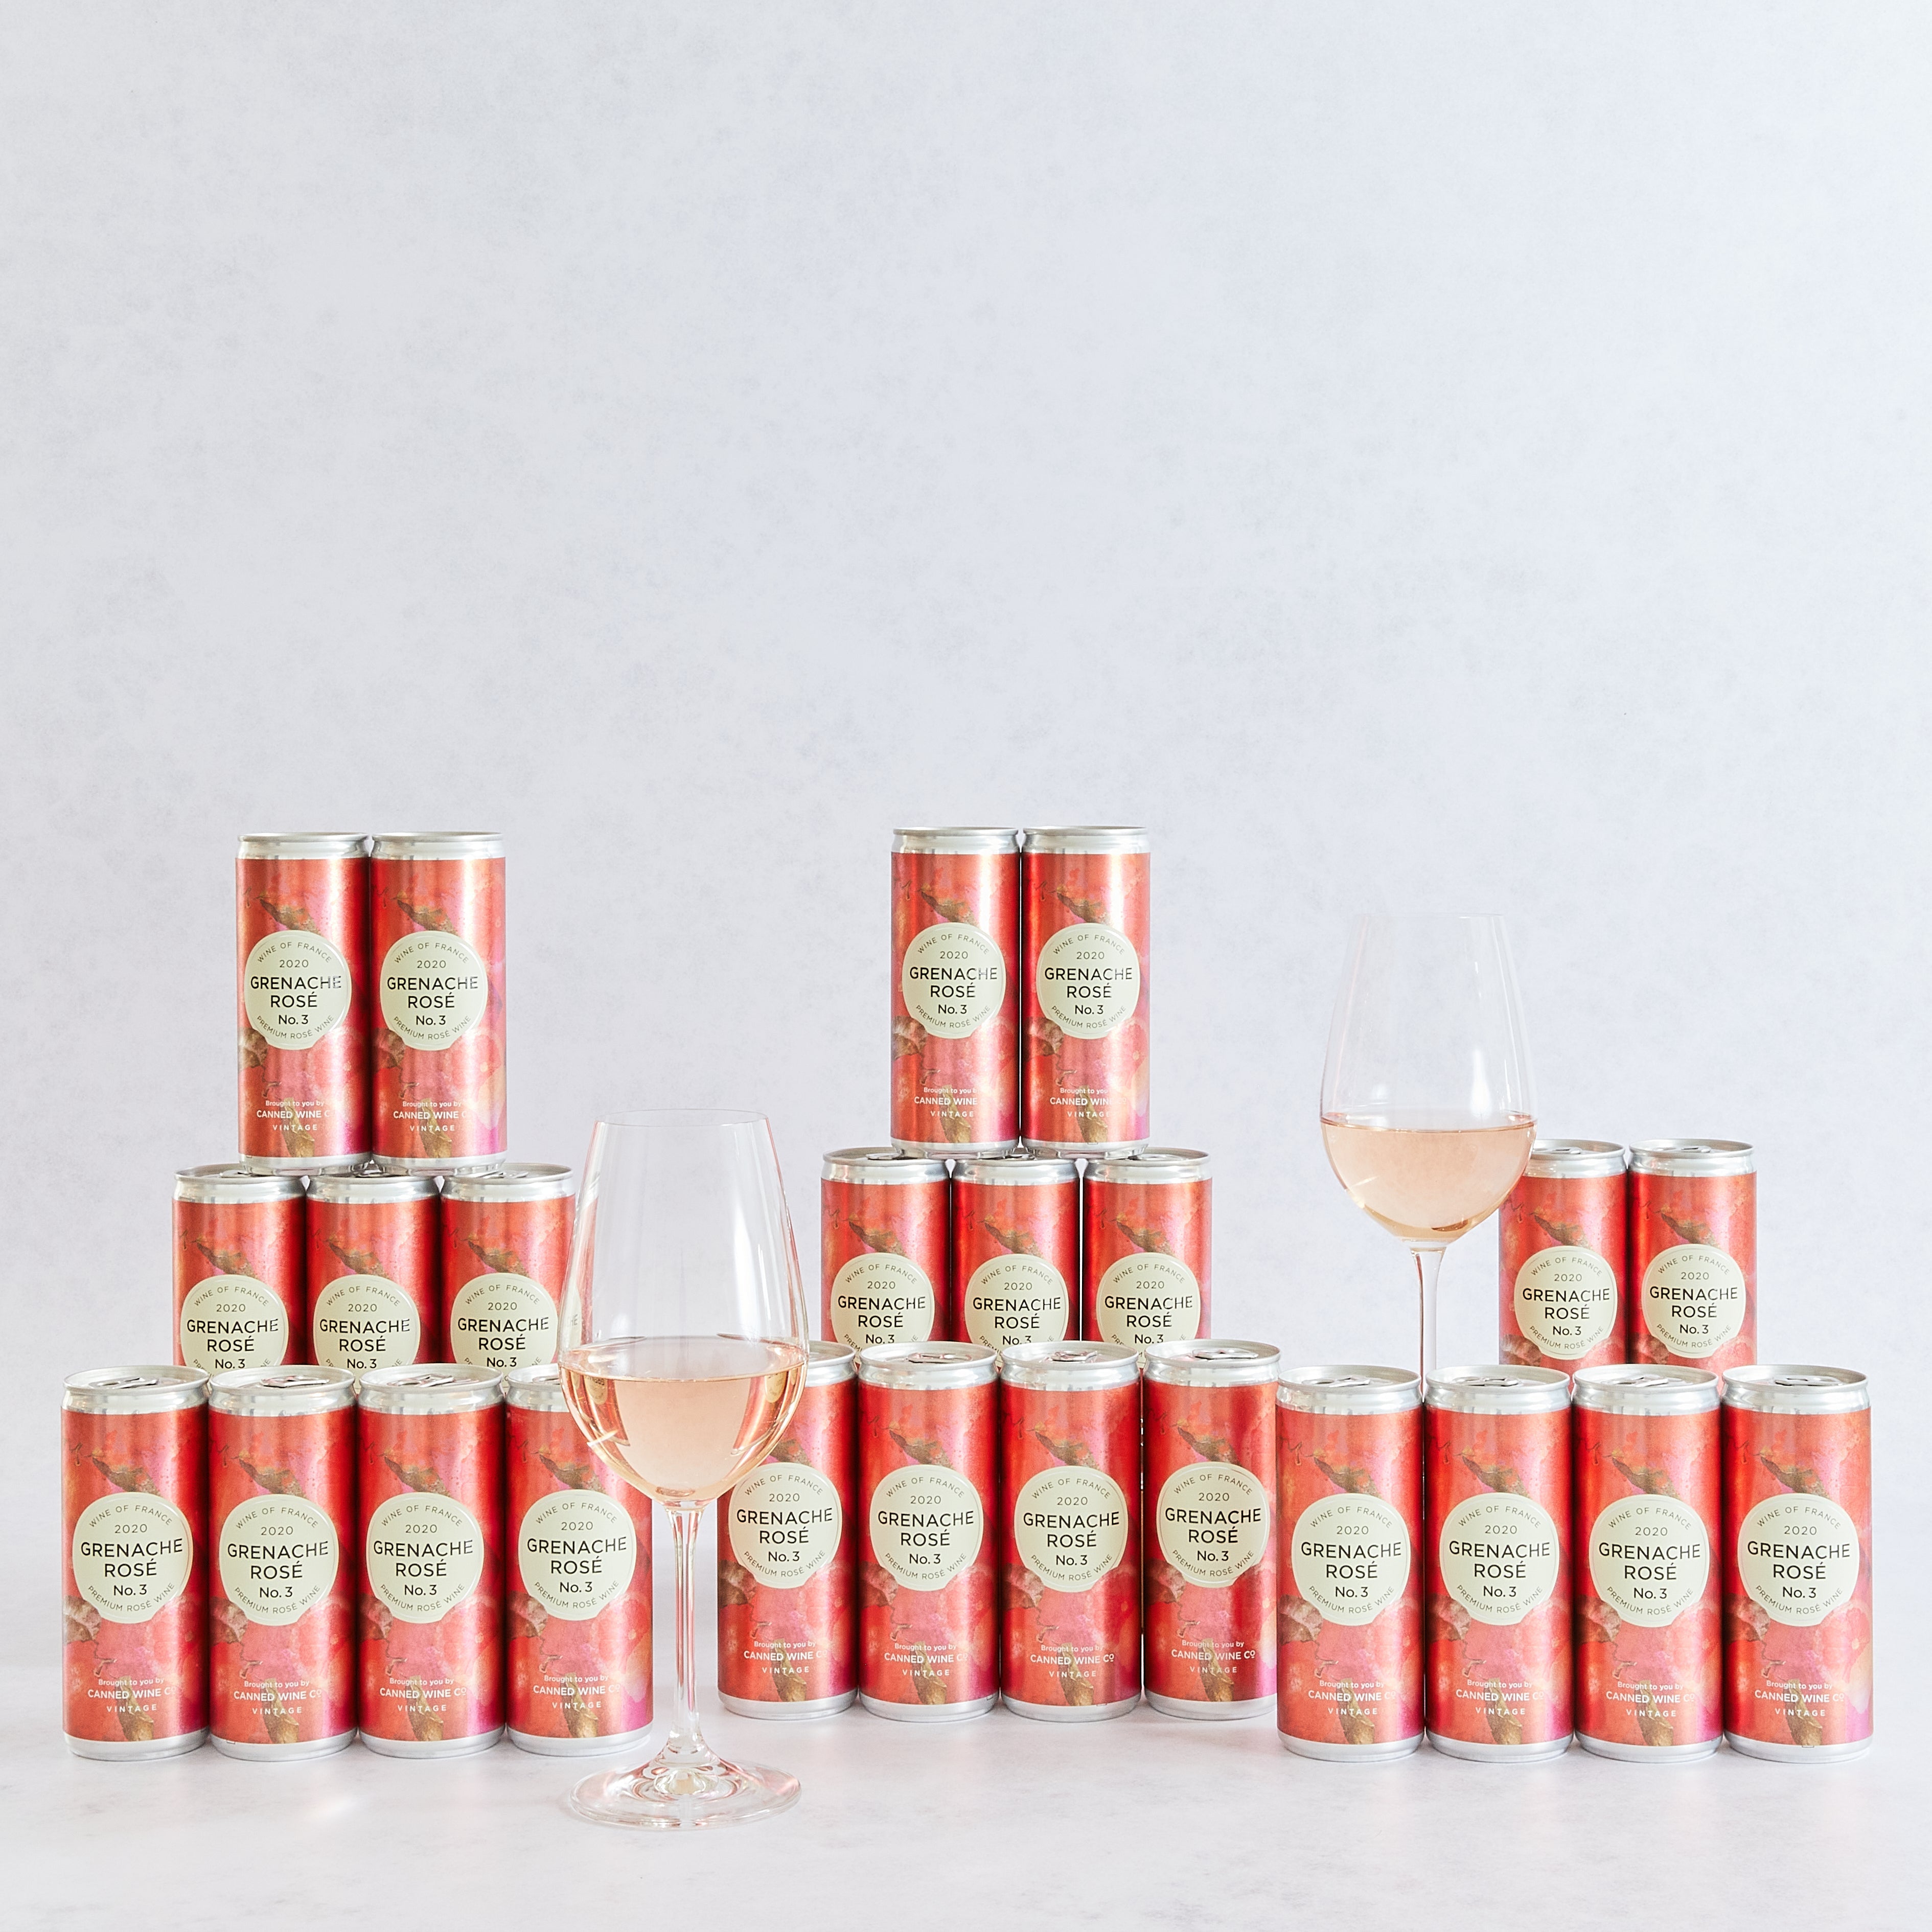 2021 – Online Co Canned Canned Wine Can Wines Buy - in Grenache Rosé Wine